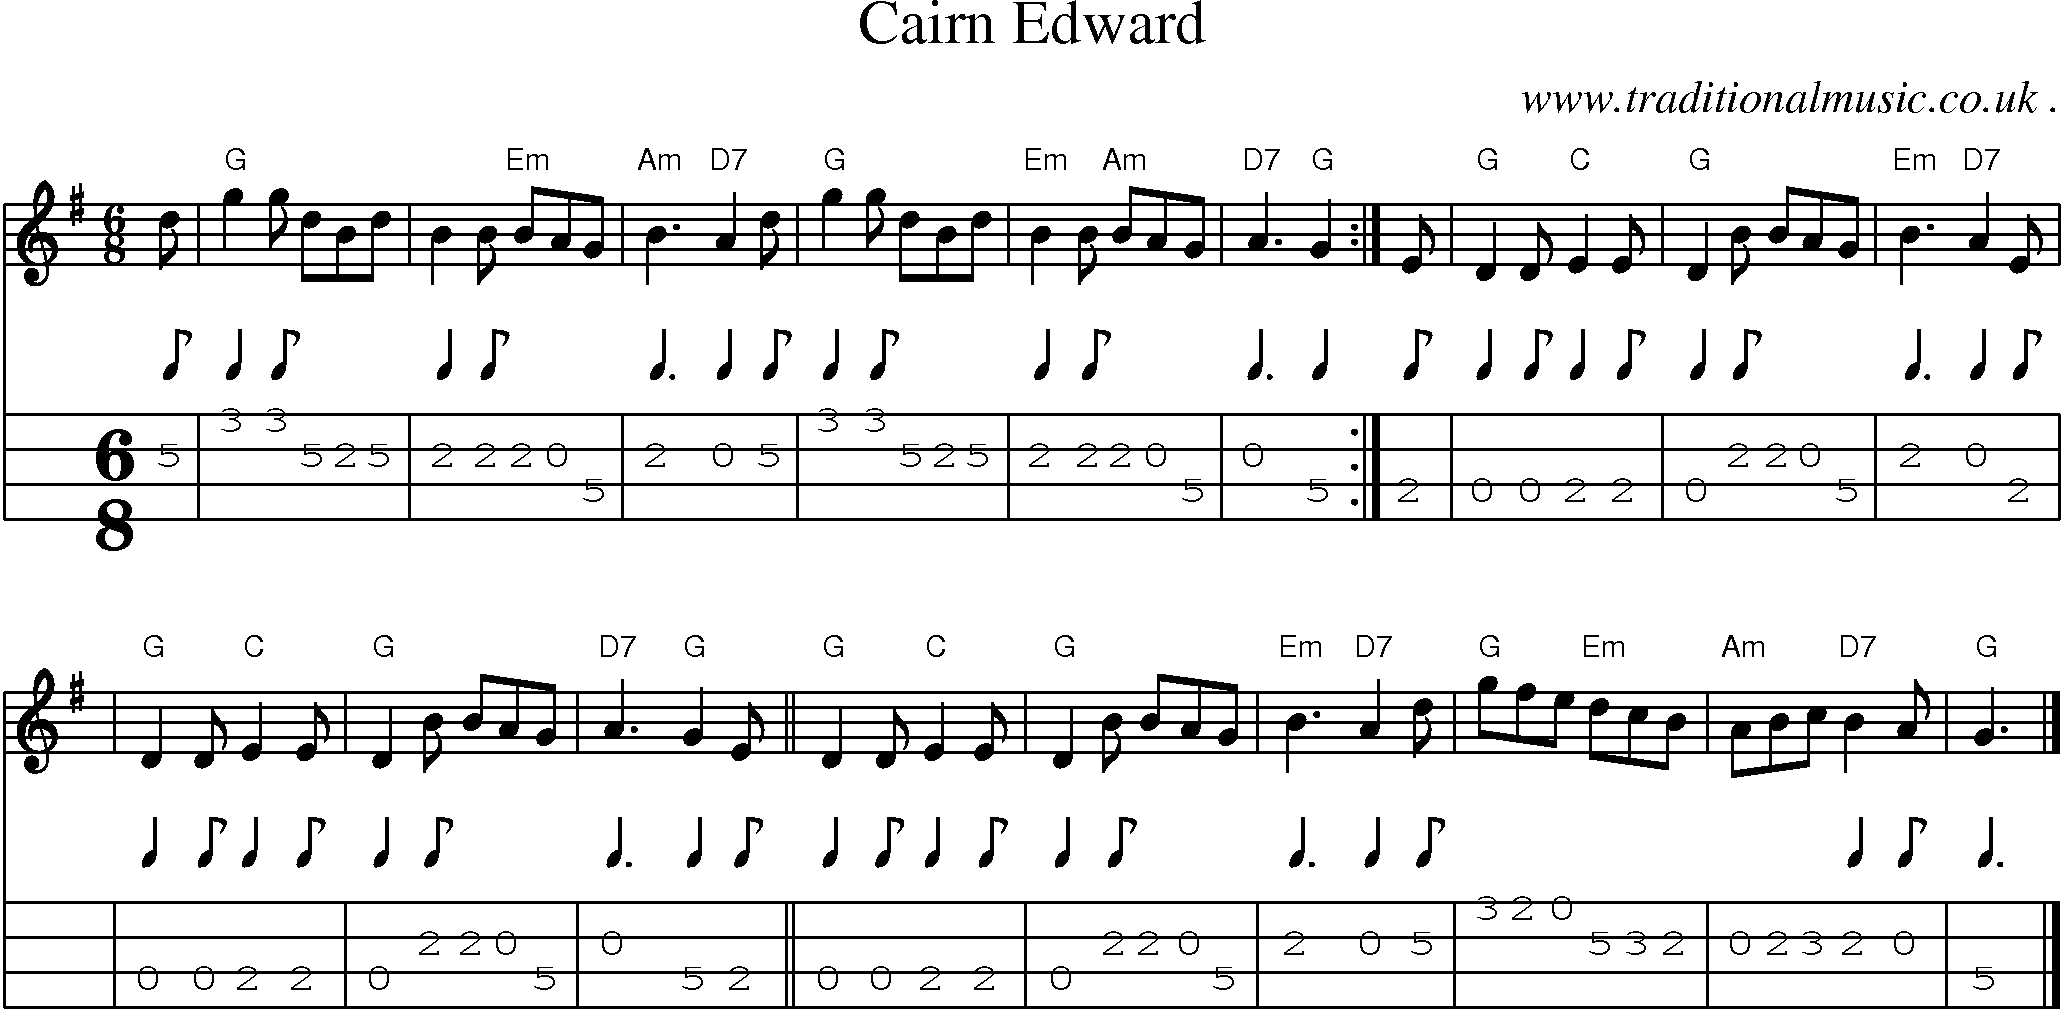 Sheet-music  score, Chords and Mandolin Tabs for Cairn Edward